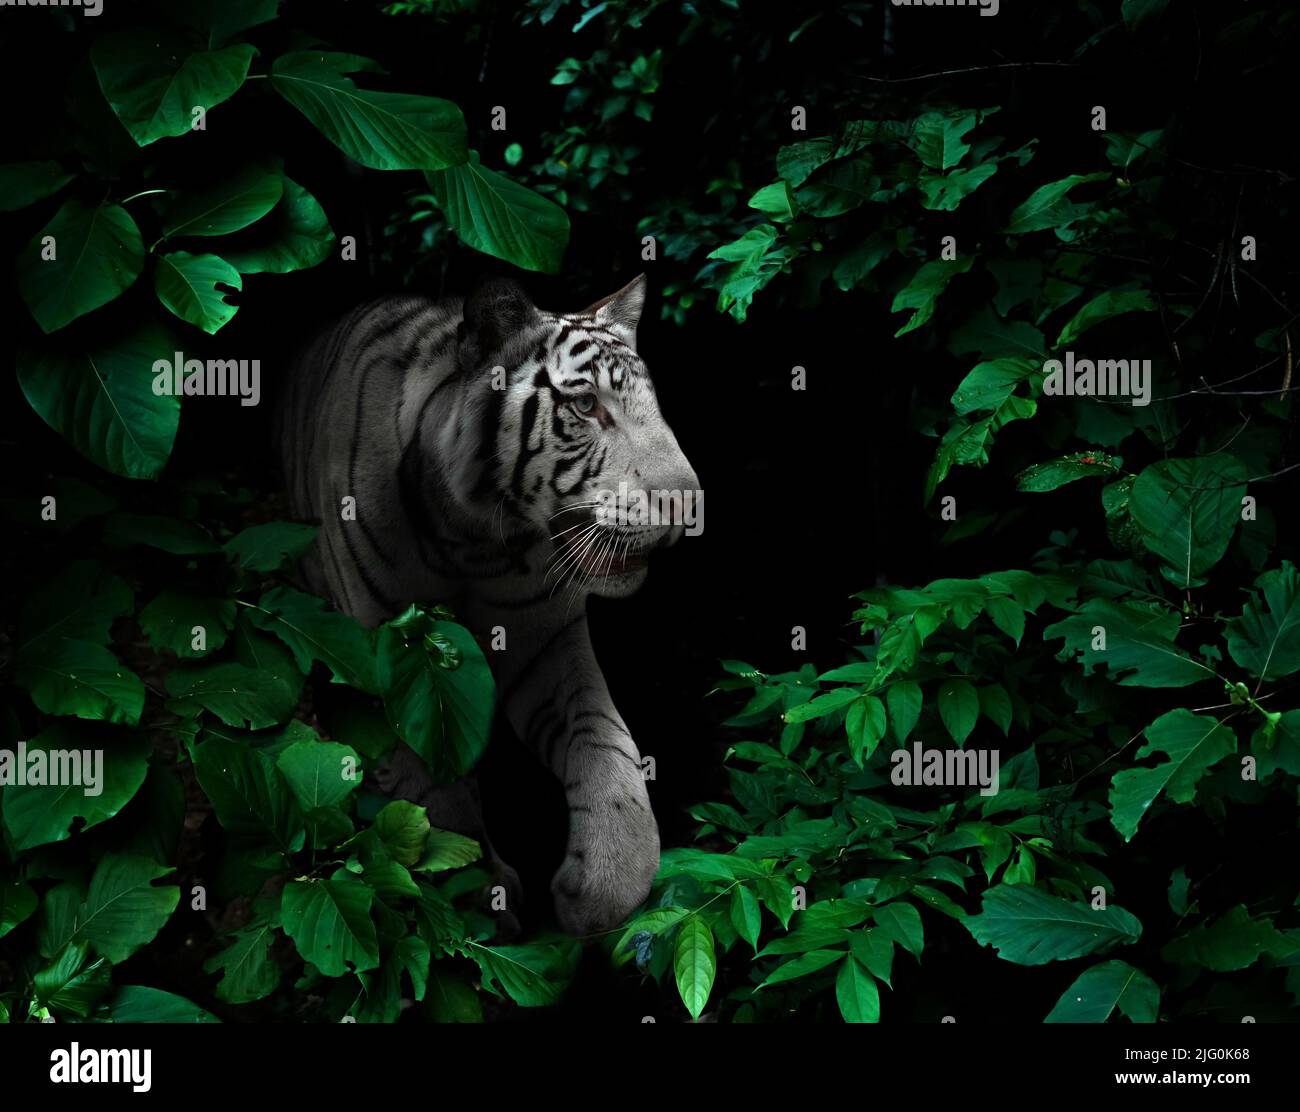 white tiger in tropical rainforest at night  dark background Stock Photo